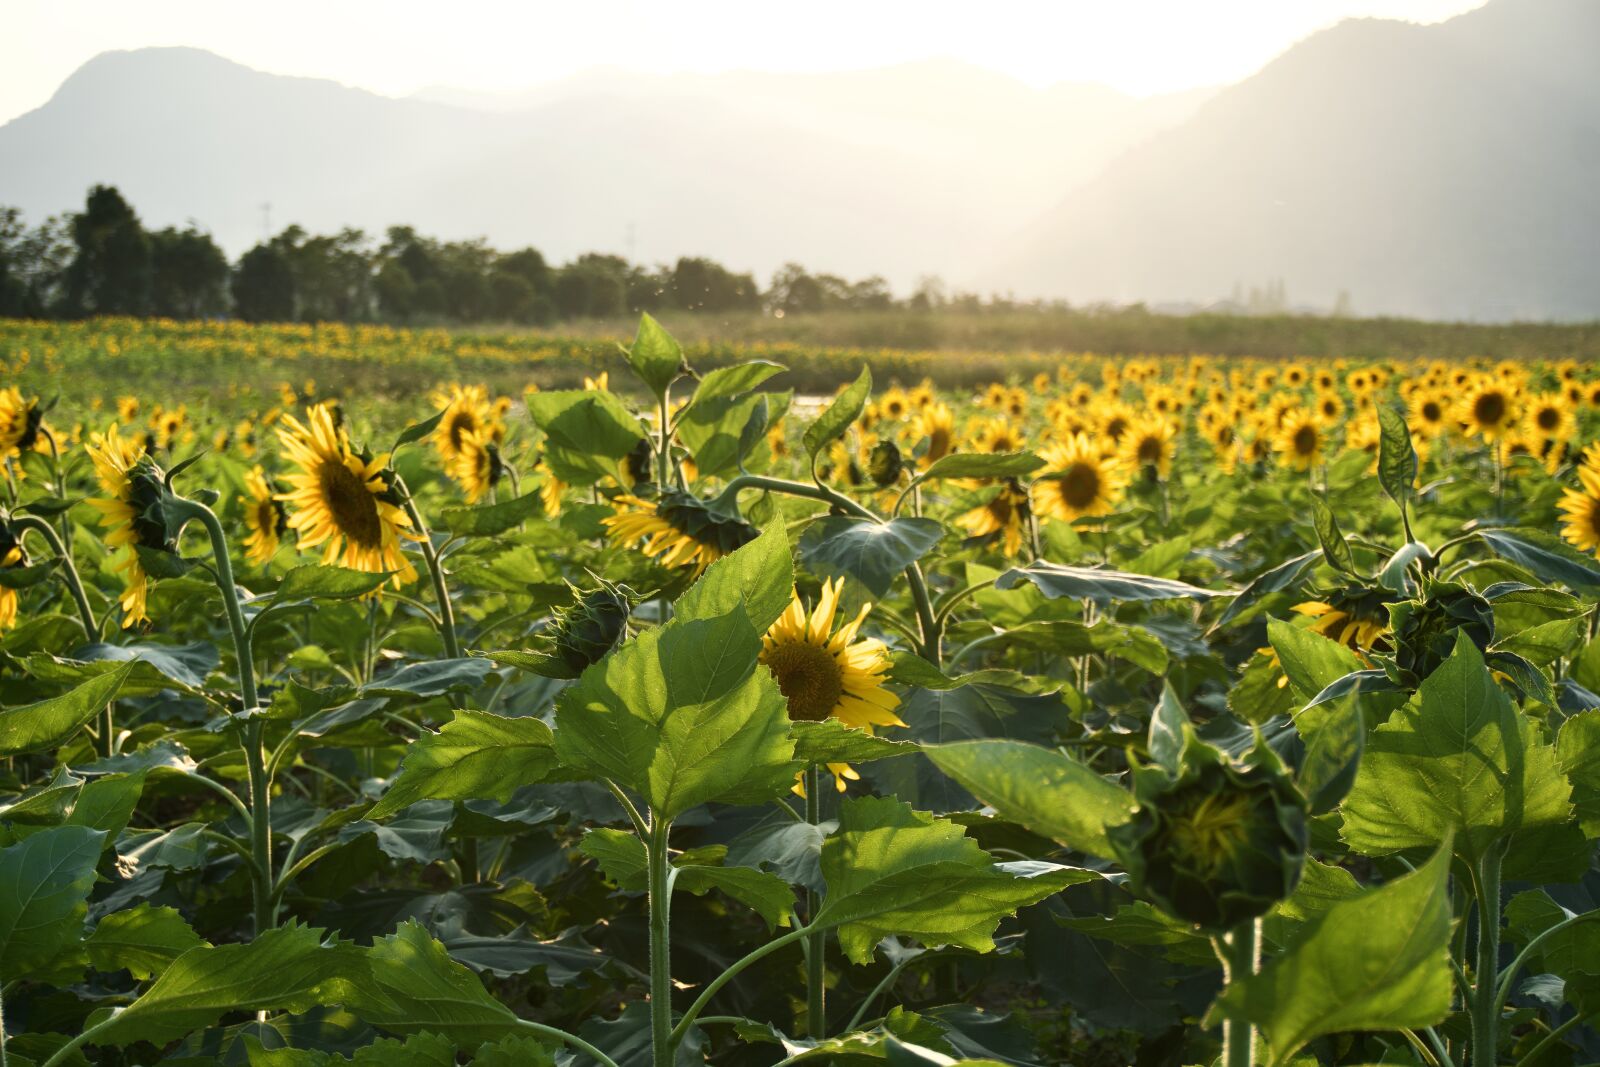 Sony a6400 sample photo. Field, sunflowers, flowers photography